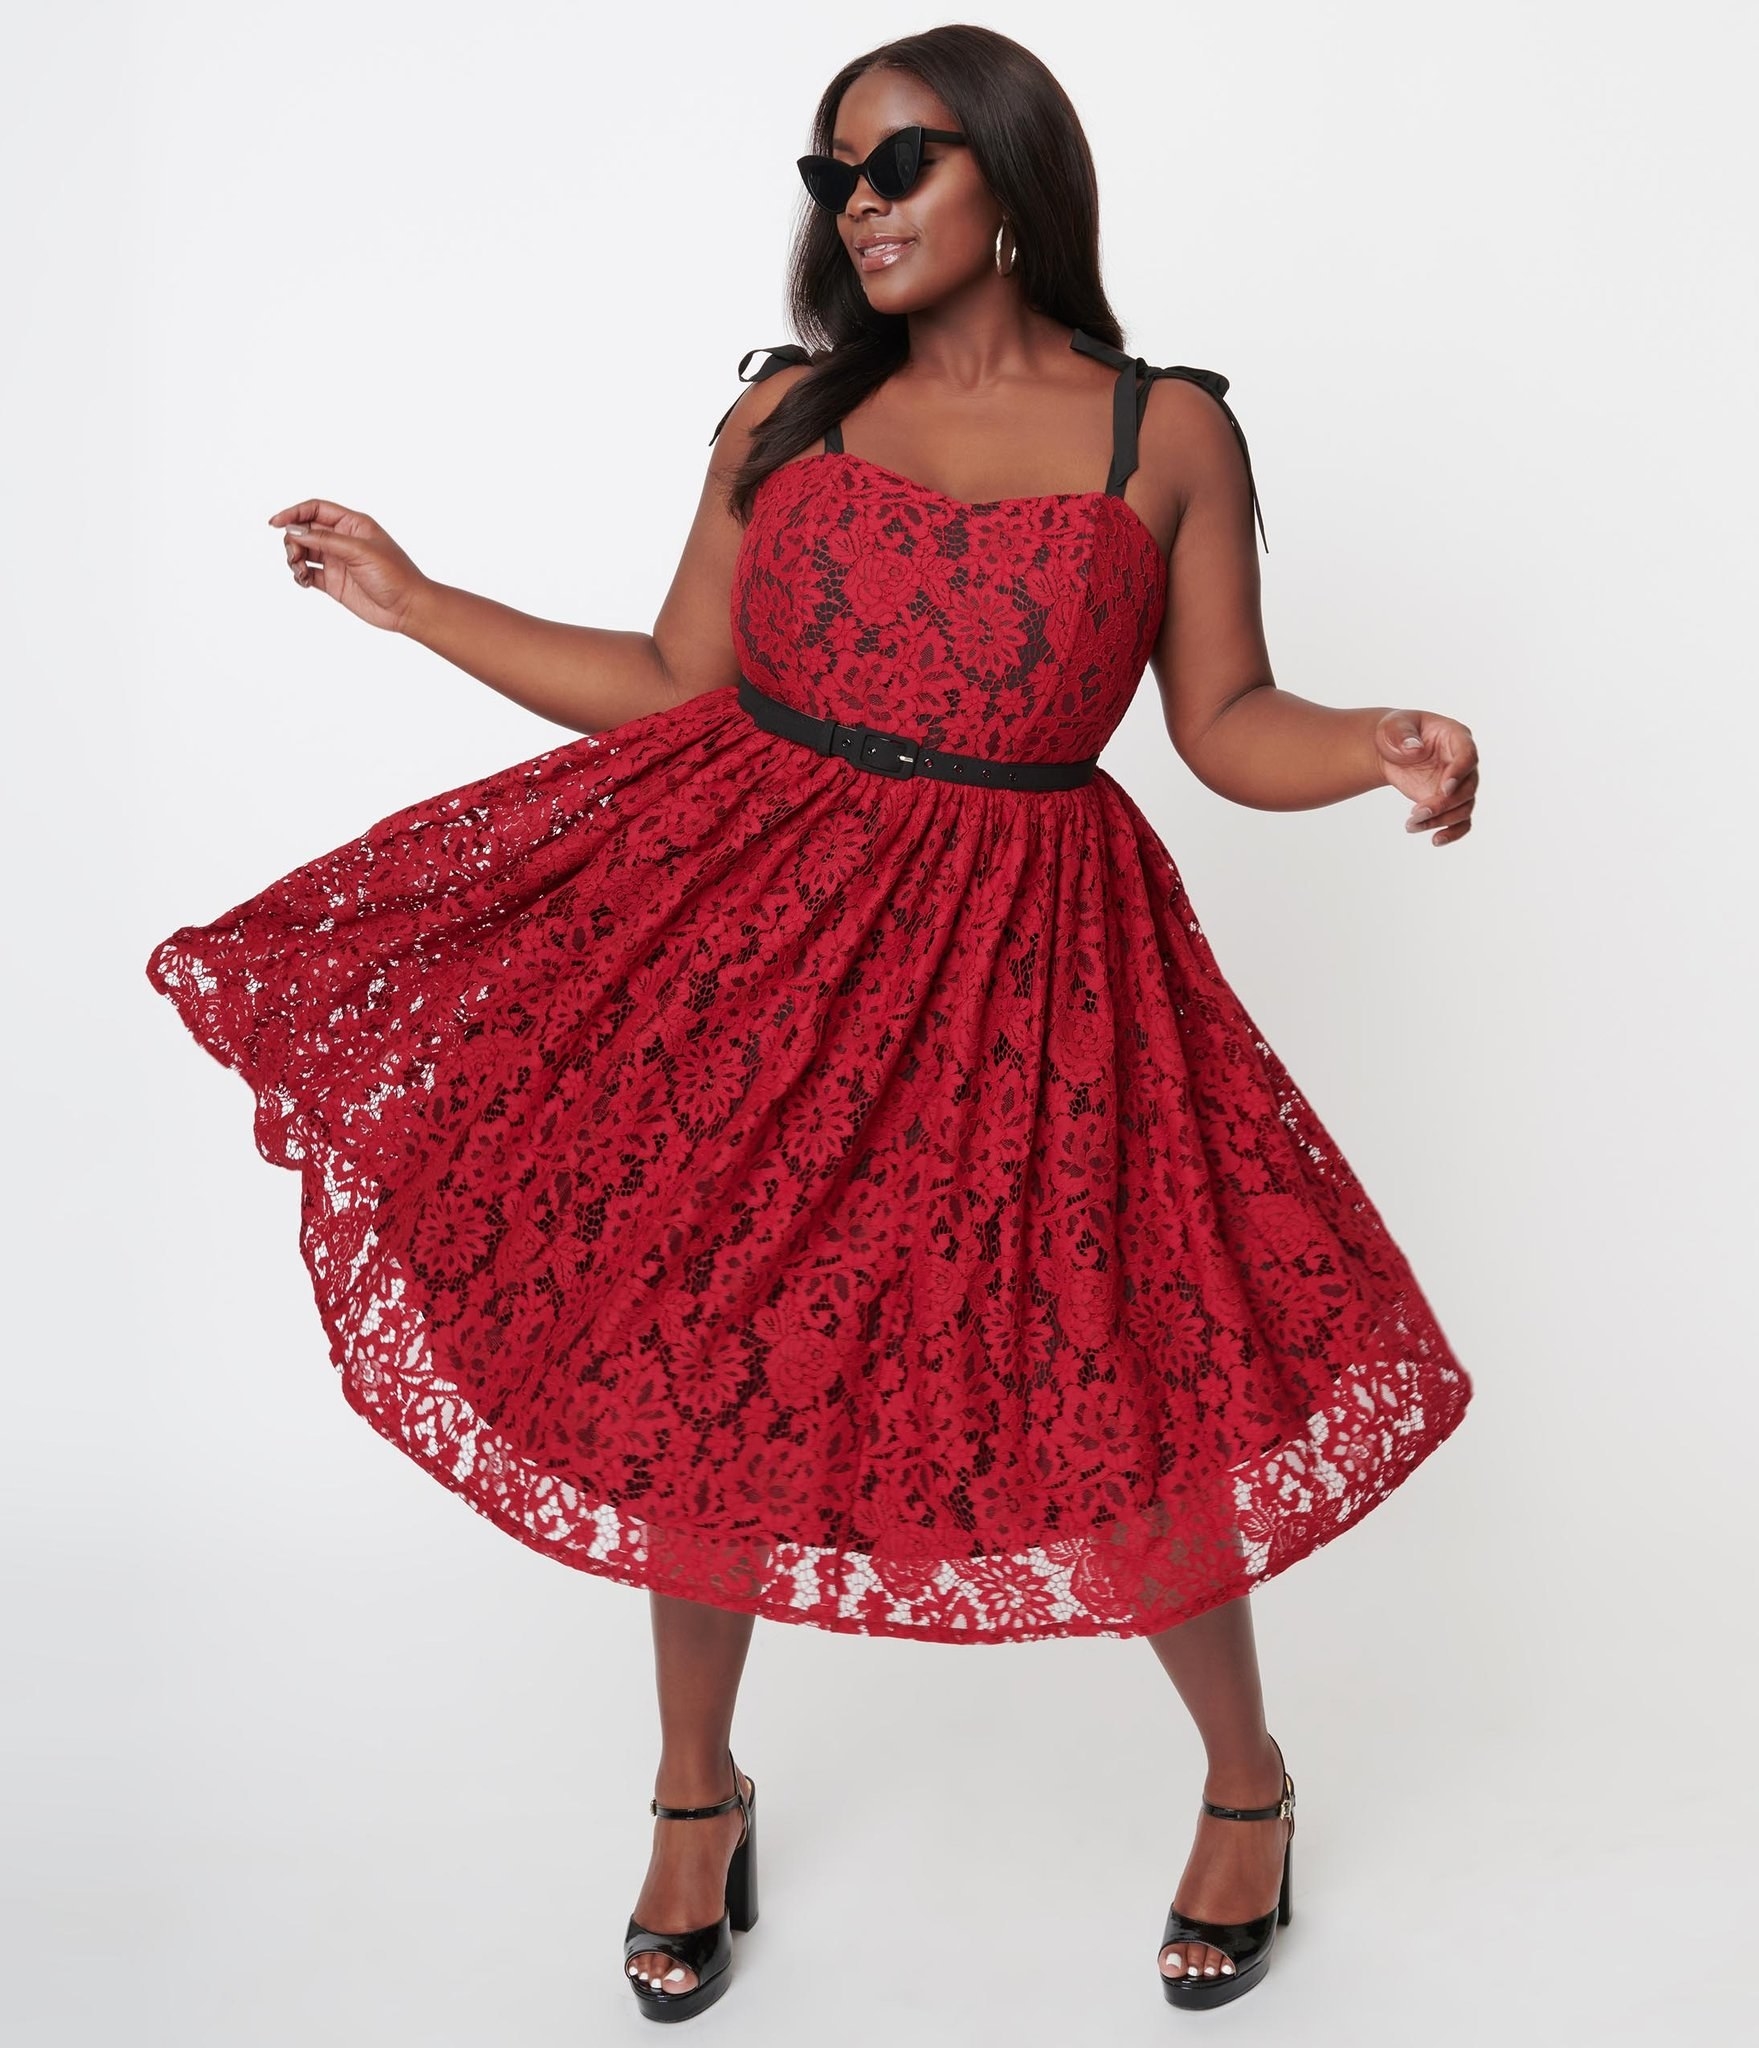 model in red lace dress with black underlay, straps, and belt